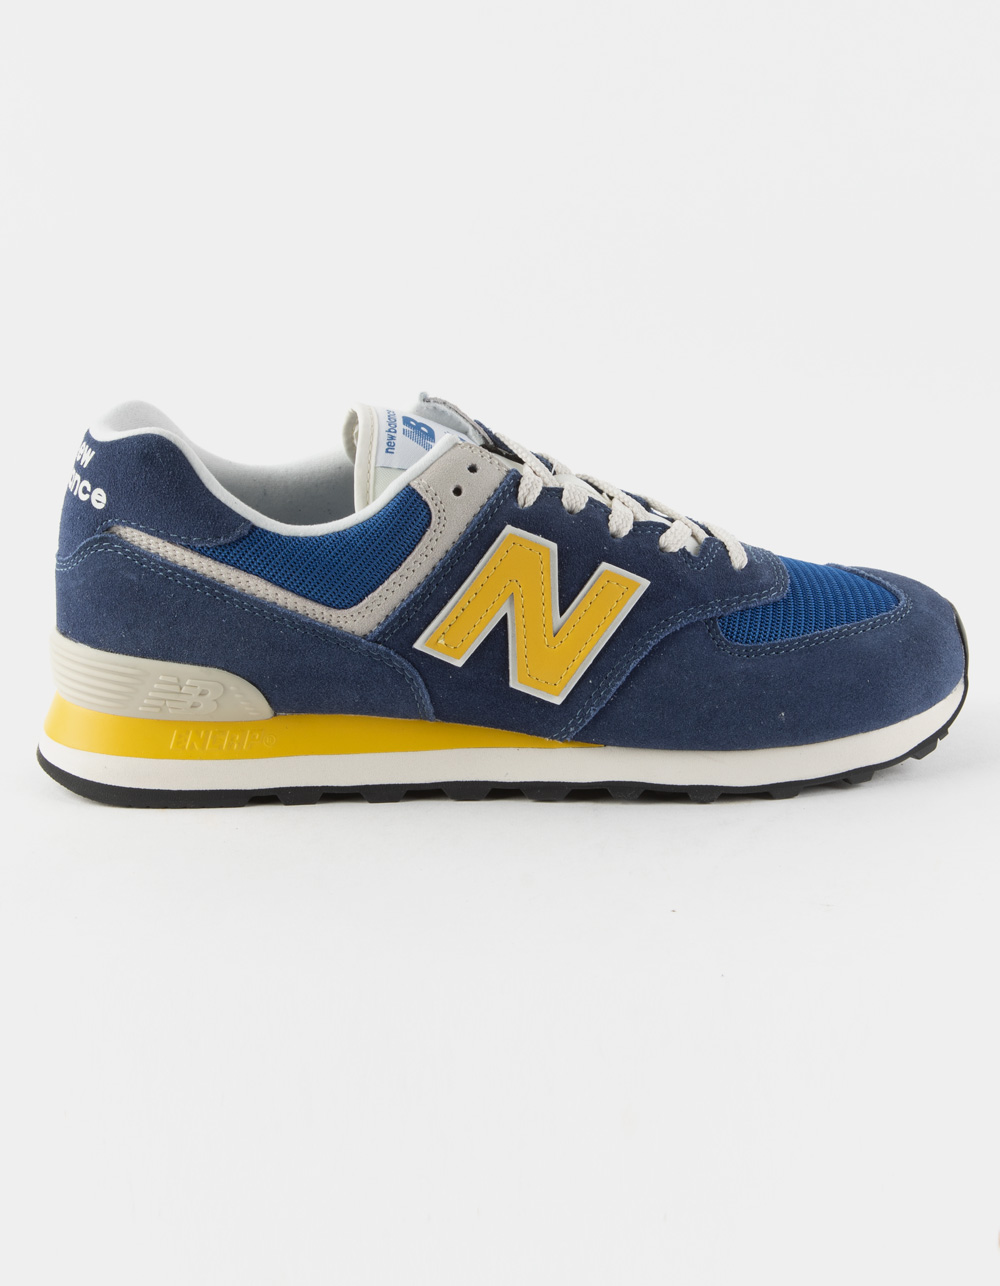 NEW BALANCE 574 Mens Shoes - NAVY/YELLOW | Tillys